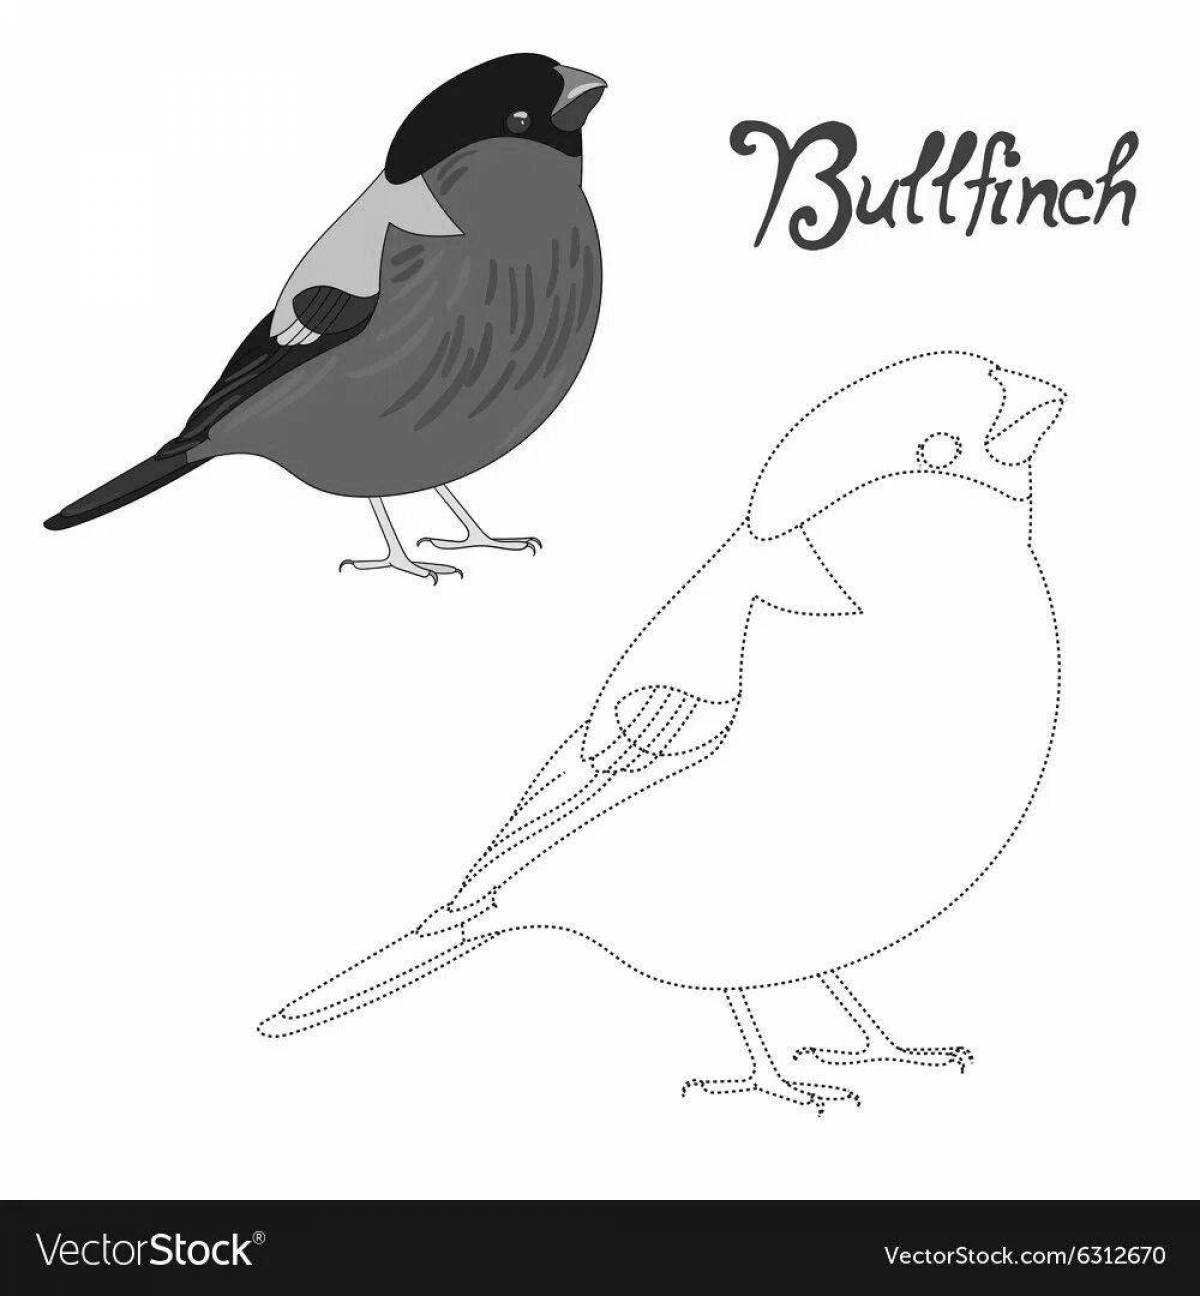 Impressive bullfinch coloring for the little ones